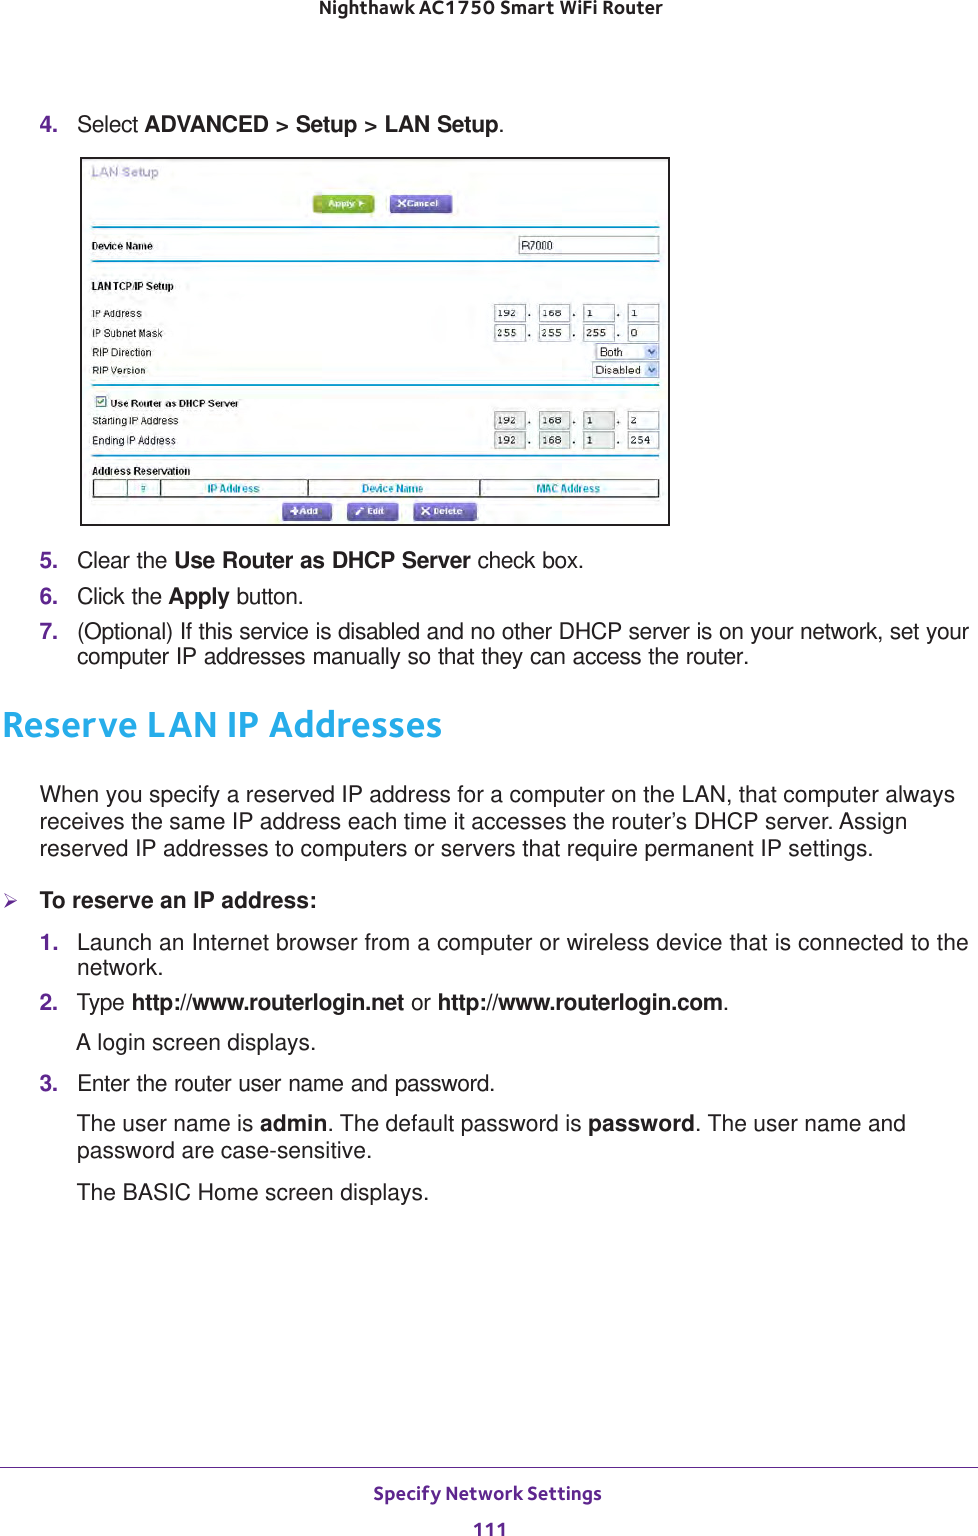 Specify Network Settings 111 Nighthawk AC1750 Smart WiFi Router4.  Select ADVANCED &gt; Setup &gt; LAN Setup.5.  Clear the Use Router as DHCP Server check box.6.  Click the Apply button.7.  (Optional) If this service is disabled and no other DHCP server is on your network, set your computer IP addresses manually so that they can access the router.Reserve LAN IP AddressesWhen you specify a reserved IP address for a computer on the LAN, that computer always receives the same IP address each time it accesses the router’s DHCP server. Assign reserved IP addresses to computers or servers that require permanent IP settings. To reserve an IP address: 1.  Launch an Internet browser from a computer or wireless device that is connected to the network.2.  Type http://www.routerlogin.net or http://www.routerlogin.com.A login screen displays.3.  Enter the router user name and password.The user name is admin. The default password is password. The user name and password are case-sensitive.The BASIC Home screen displays.